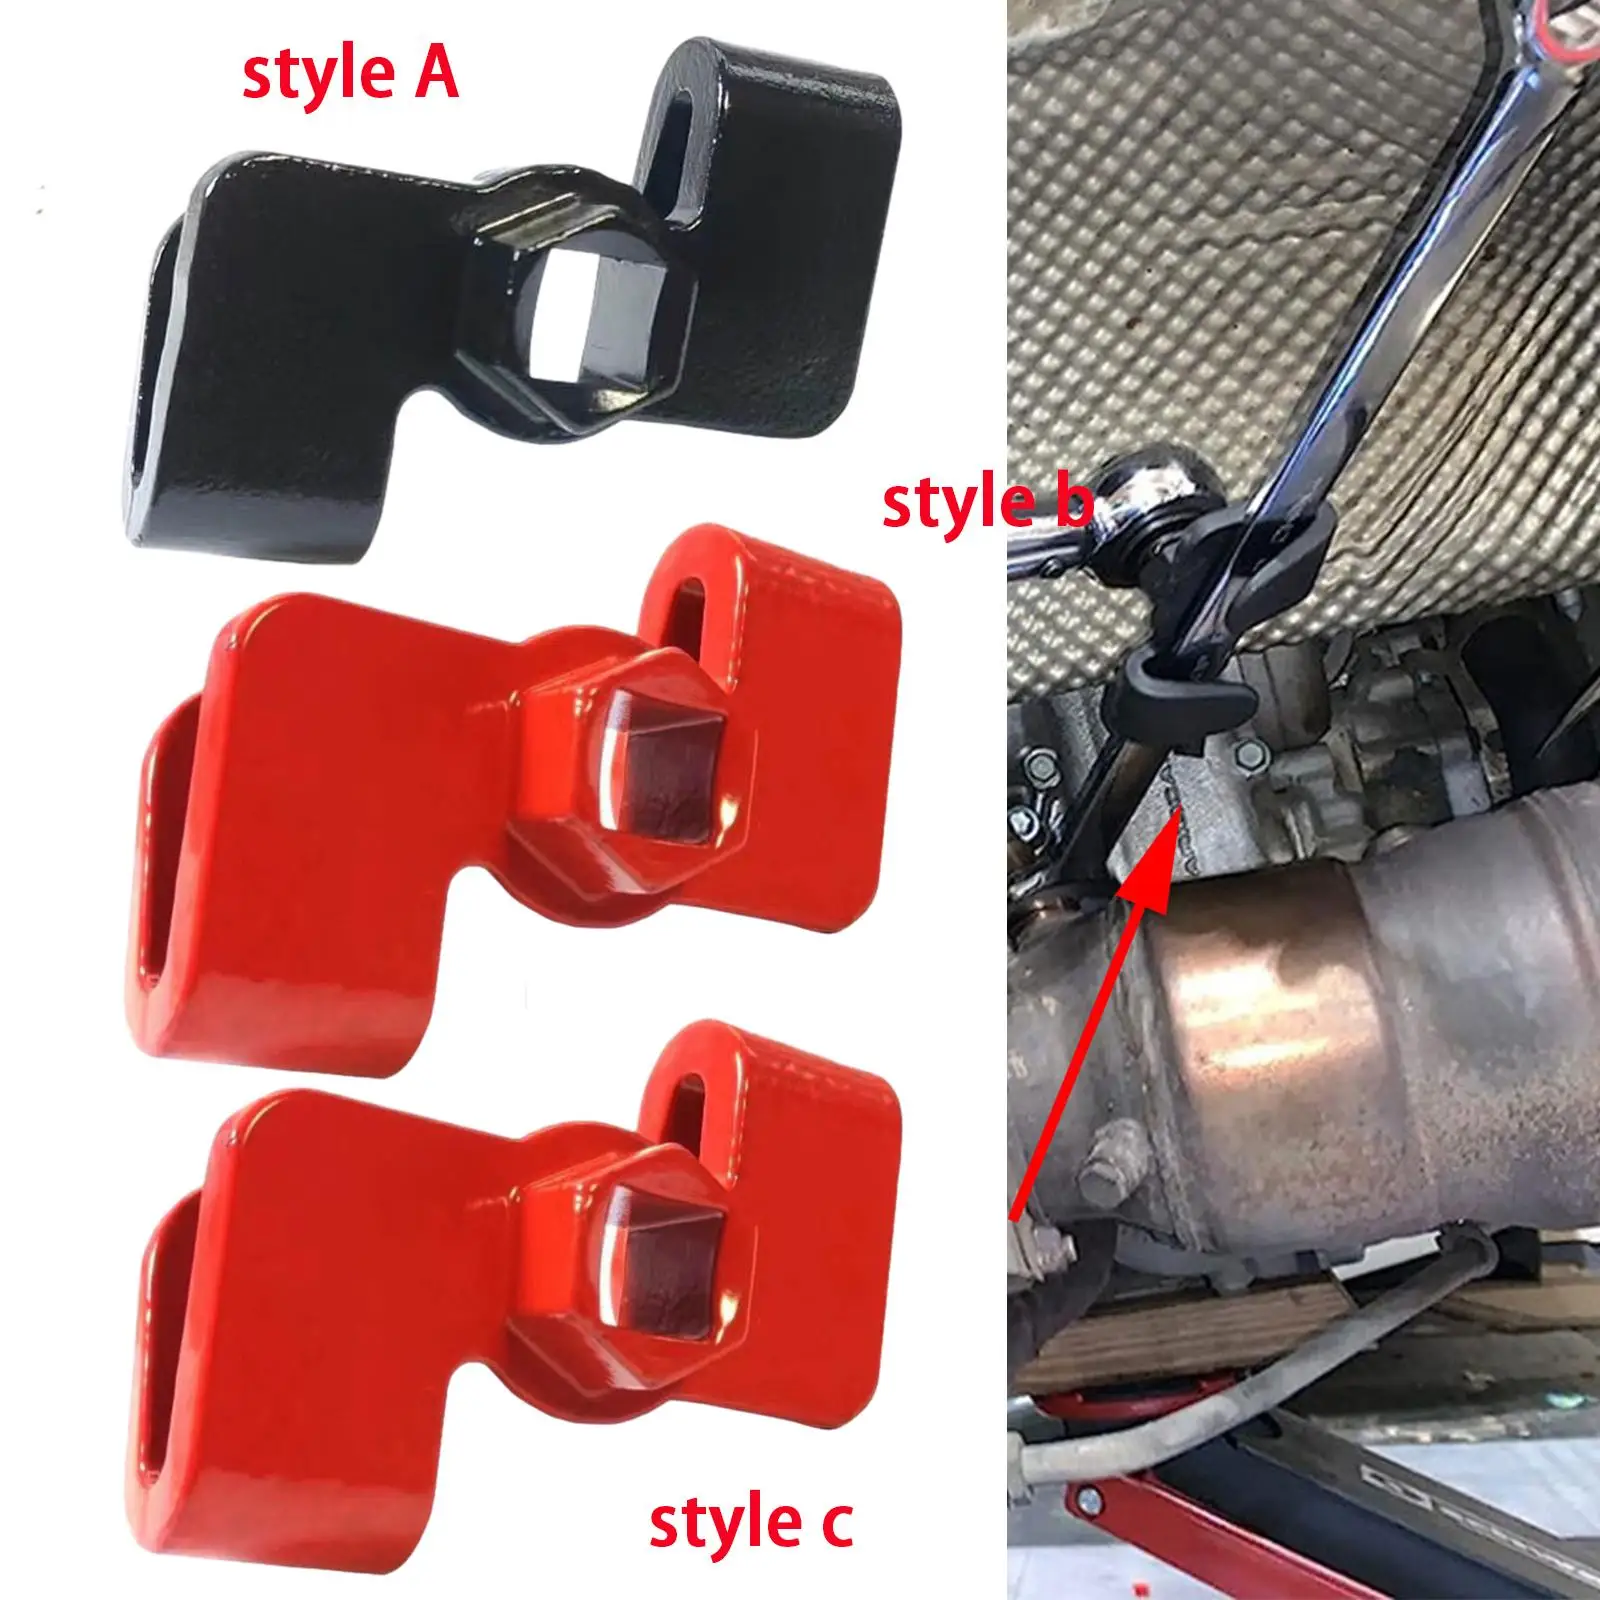 

1/2 inch Drive Breaker Bar,Wrench Extender Adaptor Universal Durable Easy to Use Accessory Wrench Extender Adaptor Tool Bar